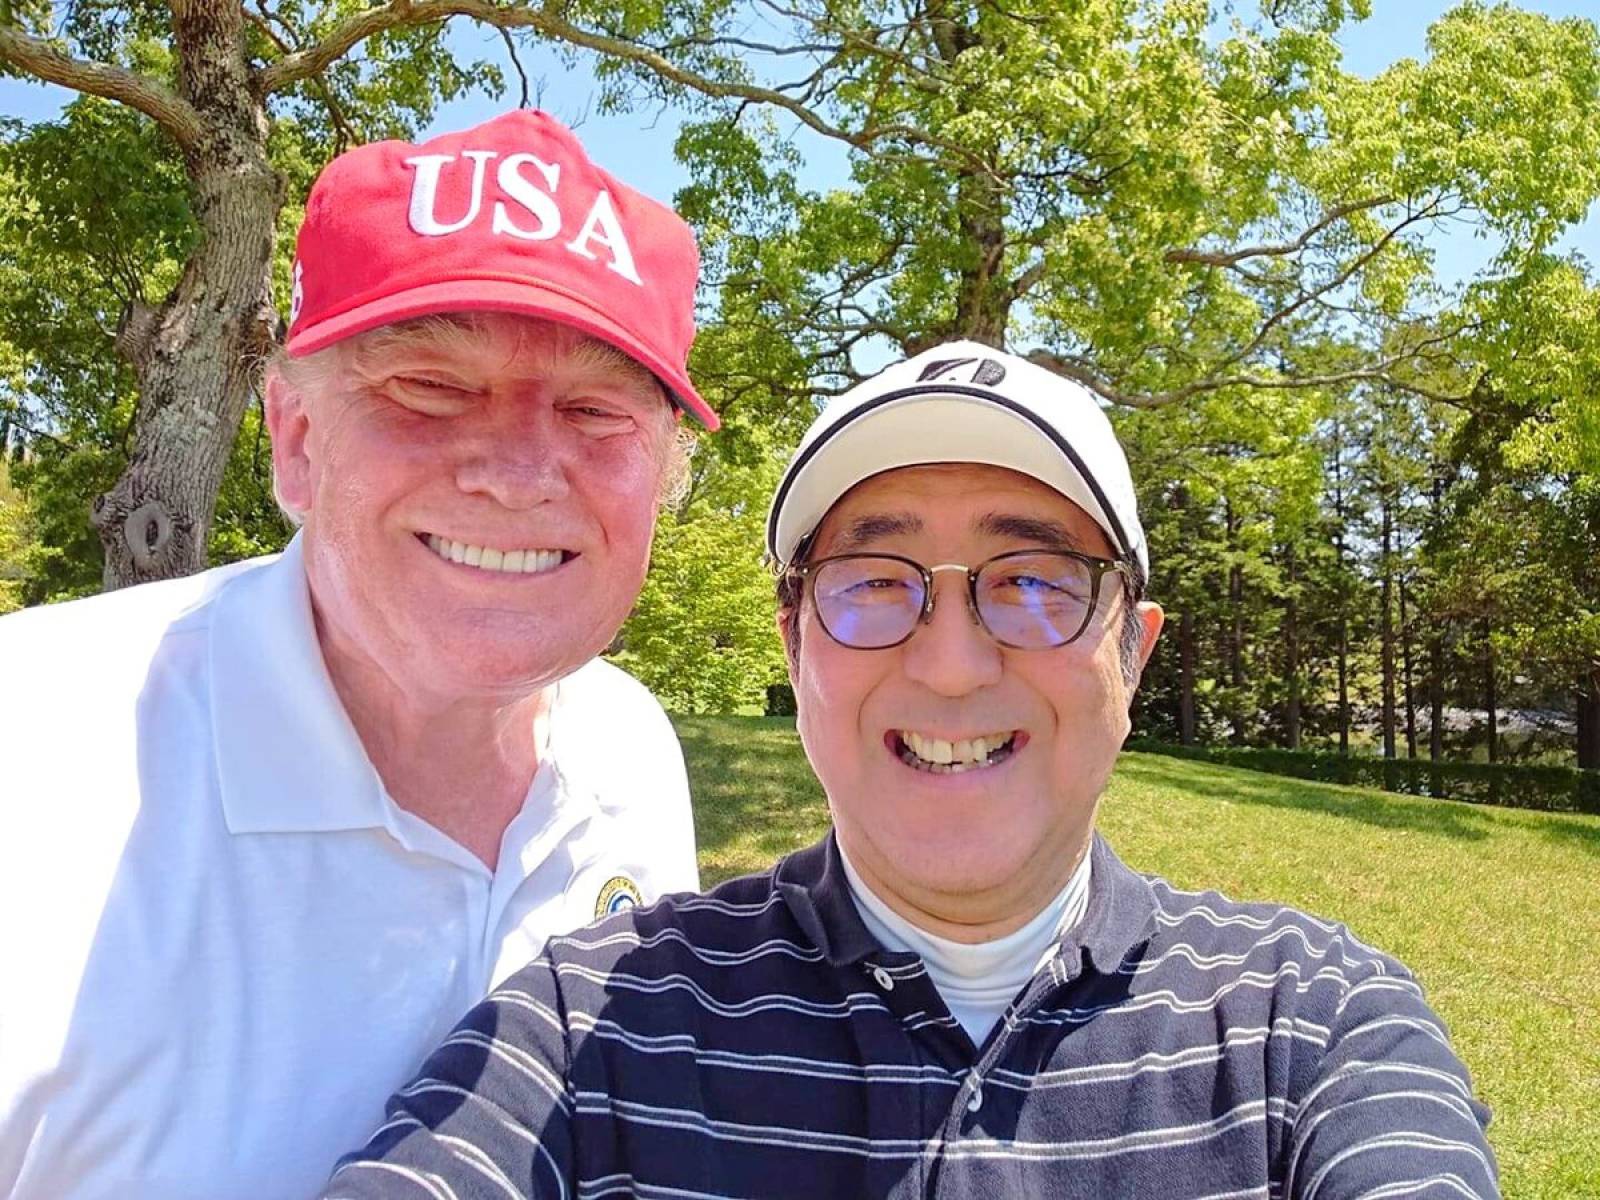 Japan's Prime Minister Shinzo Abe poses for a selfie with U.S. President Donald Trump at Mobara Country Club in Mobara